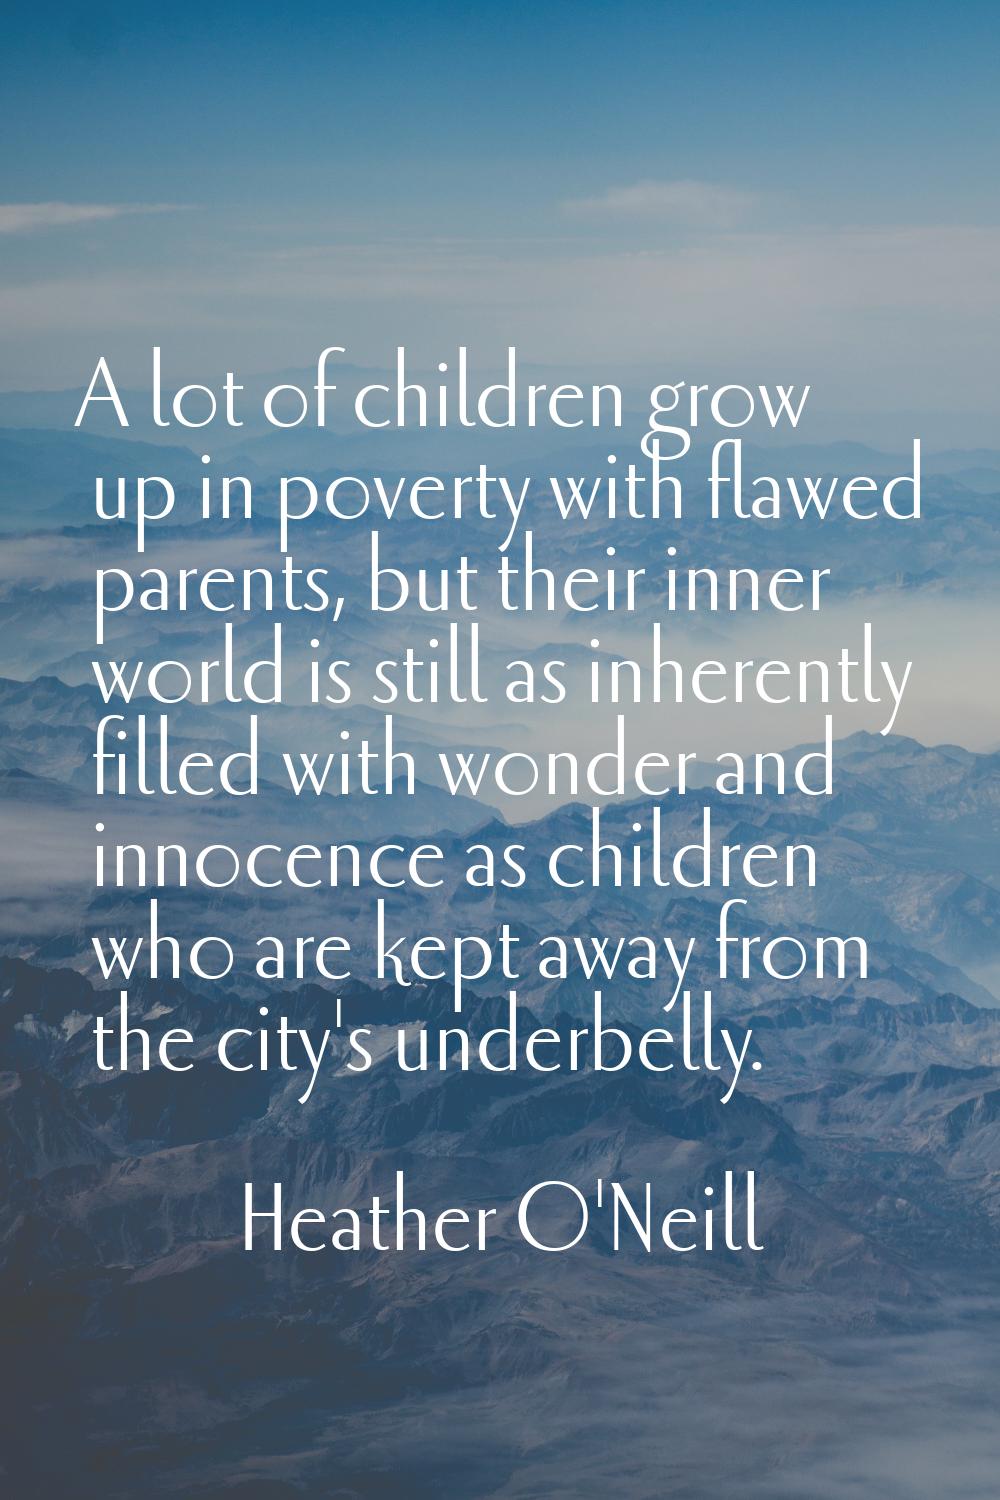 A lot of children grow up in poverty with flawed parents, but their inner world is still as inheren